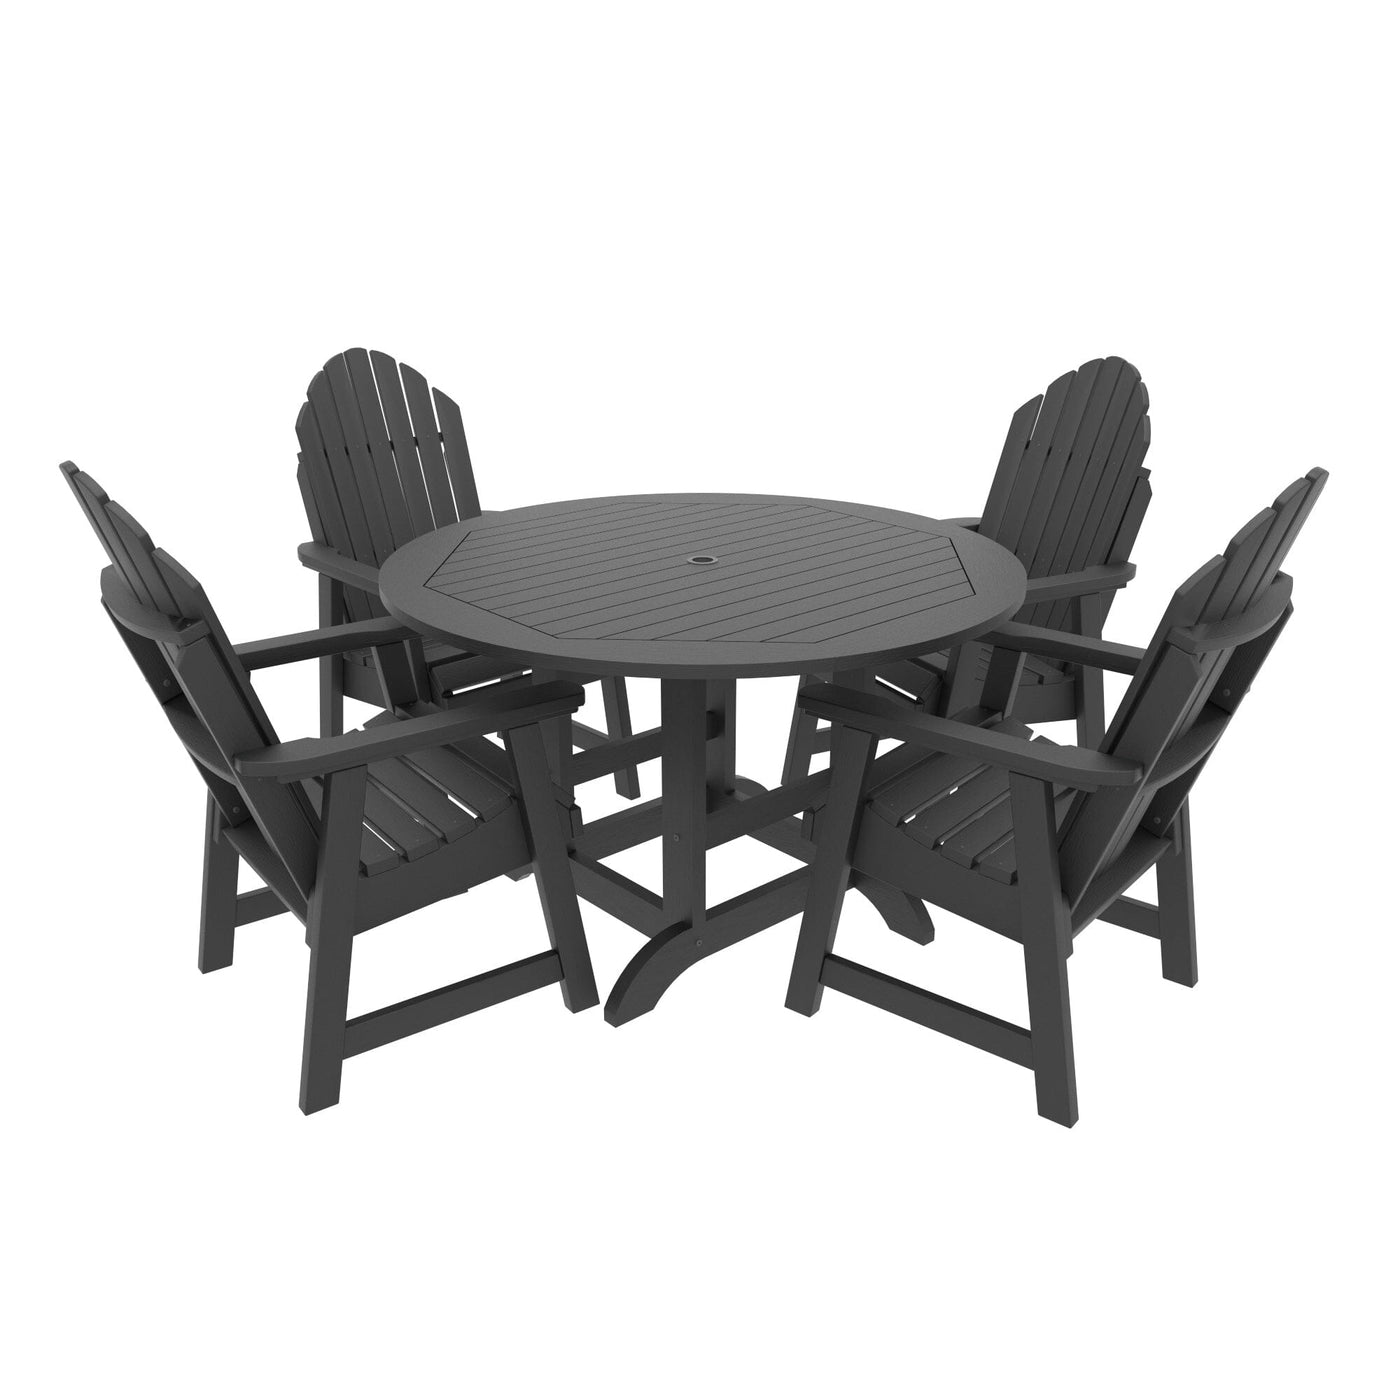 Commercial Grade 5 Pc Muskoka Adirondack Dining Set with 48” Table Kitted Sets Sequoia Professional Black 